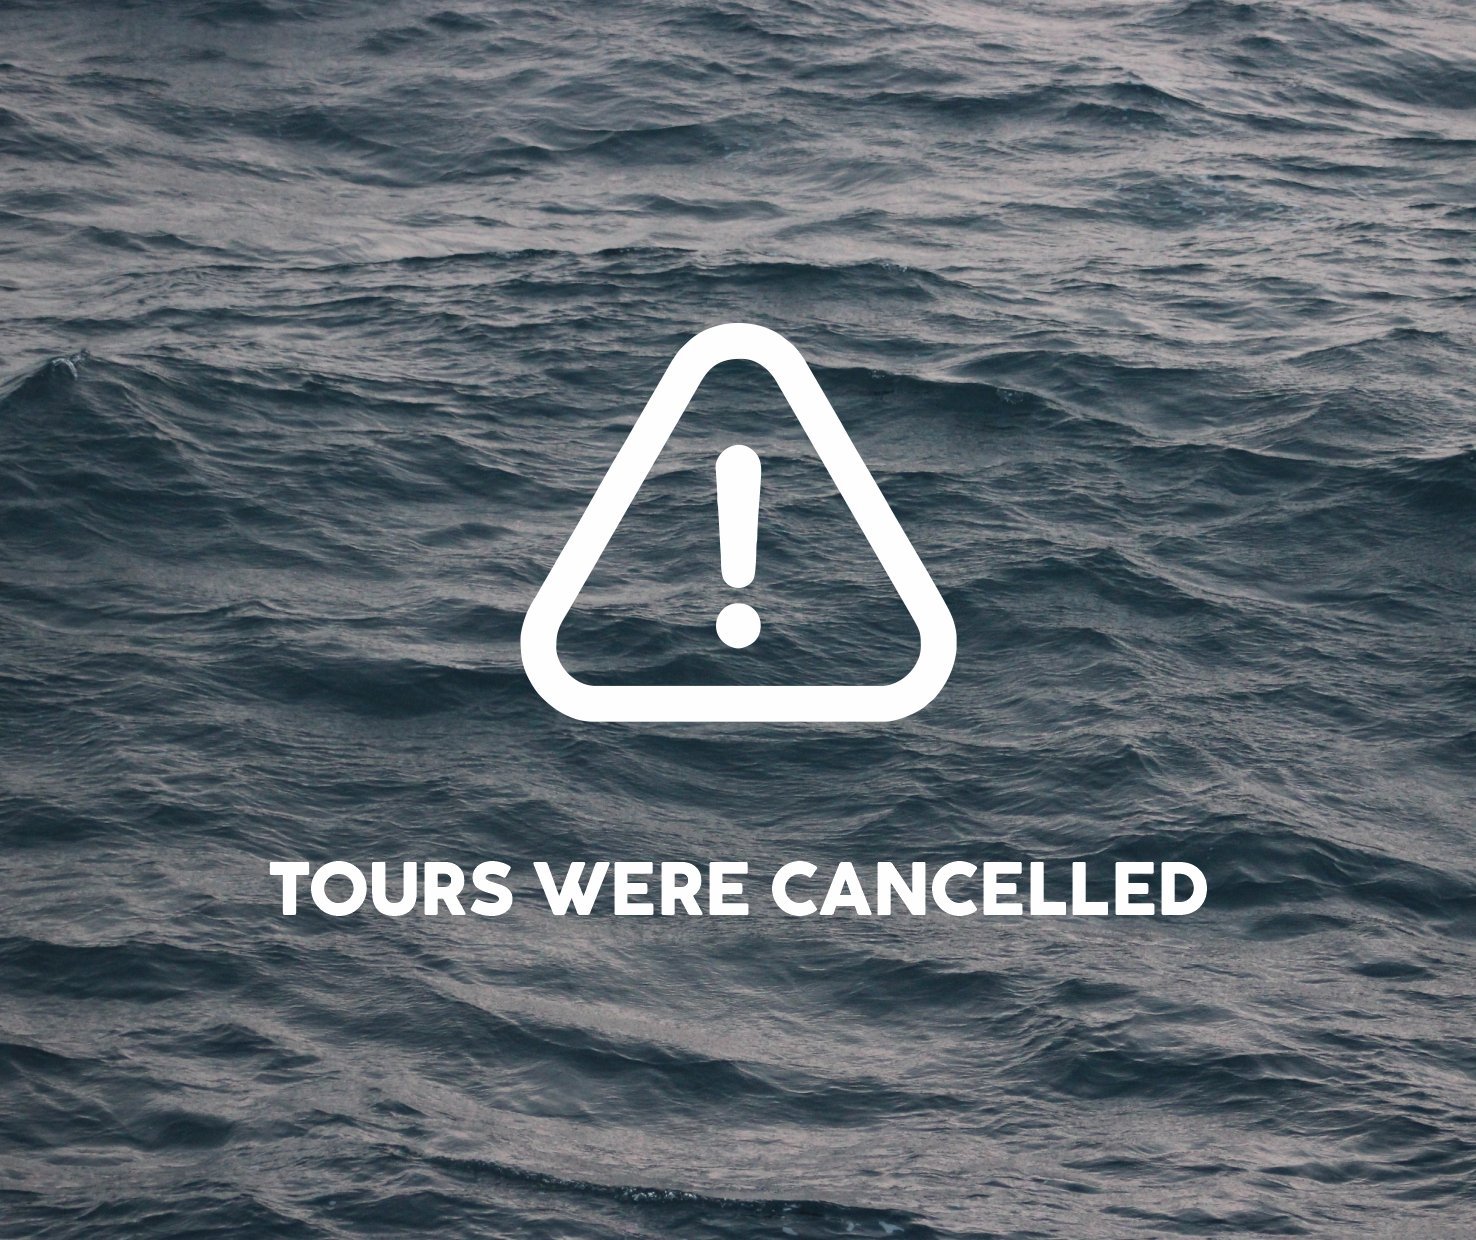 CANCELLED_TOURS (1).jpg